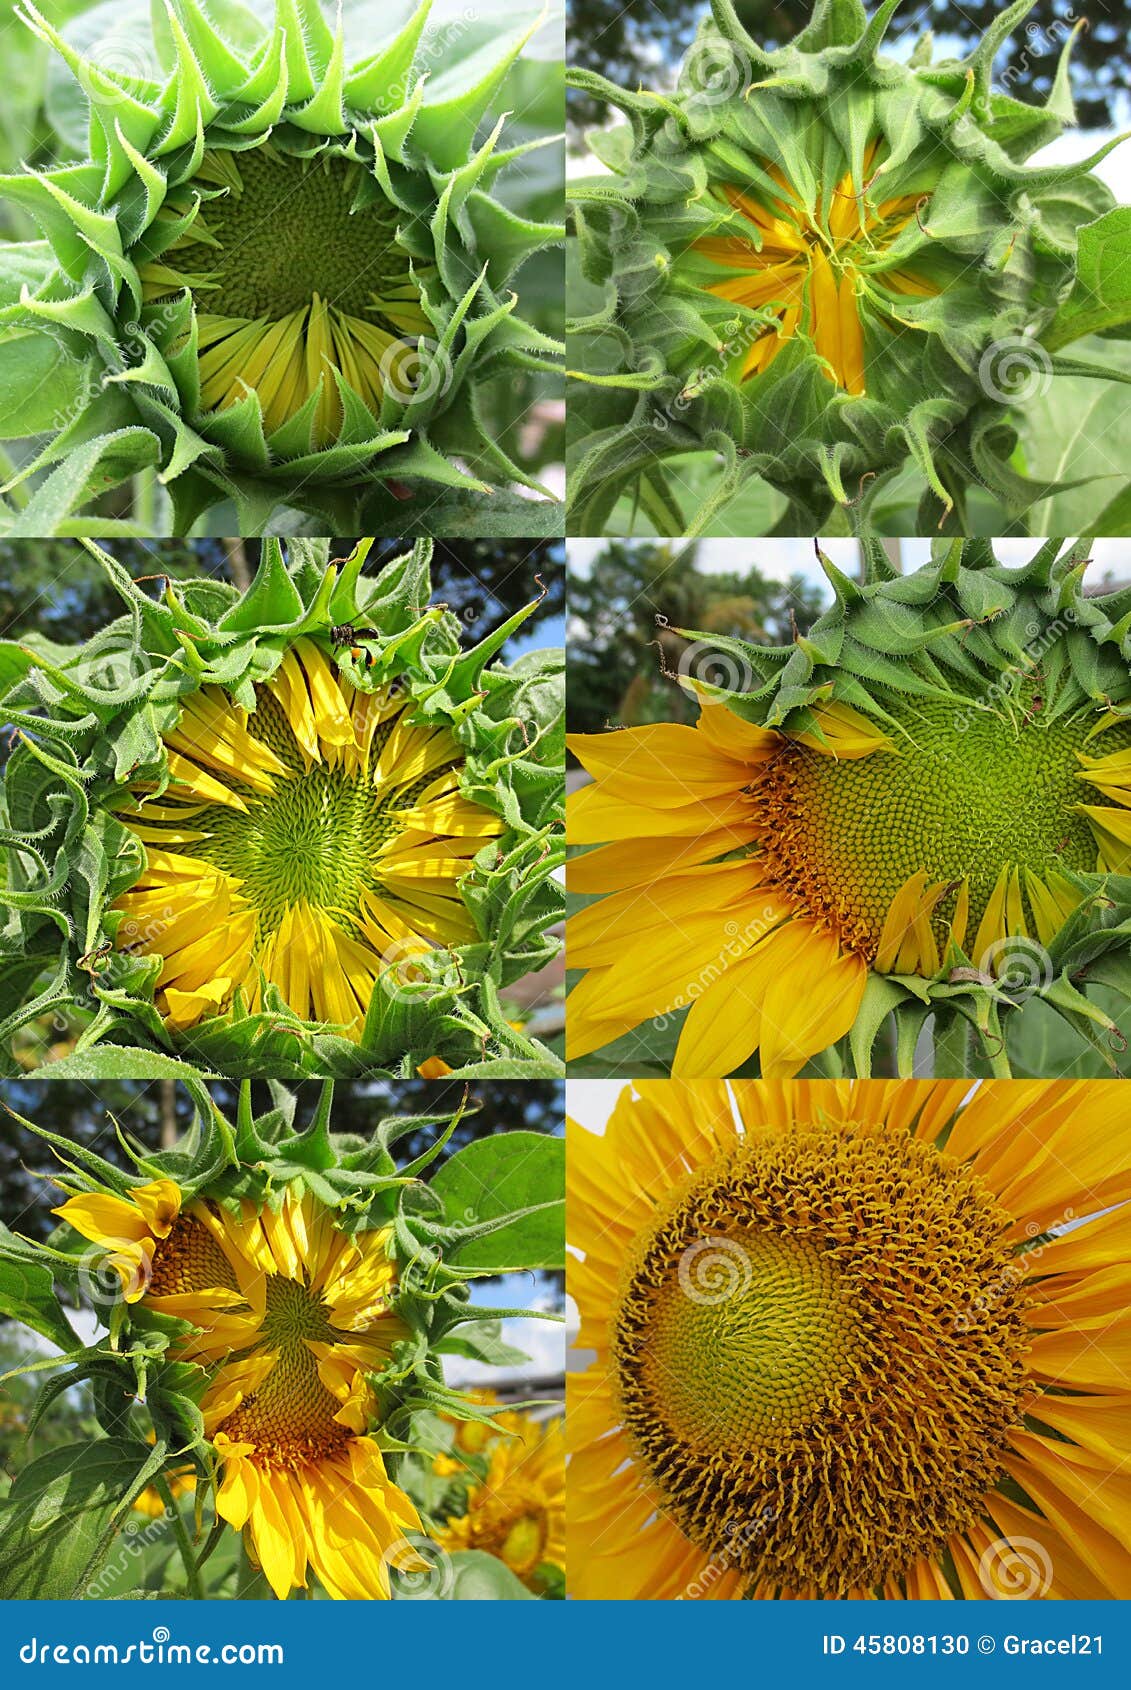 Growing Stages of Sunflowers: A Blooming Journey